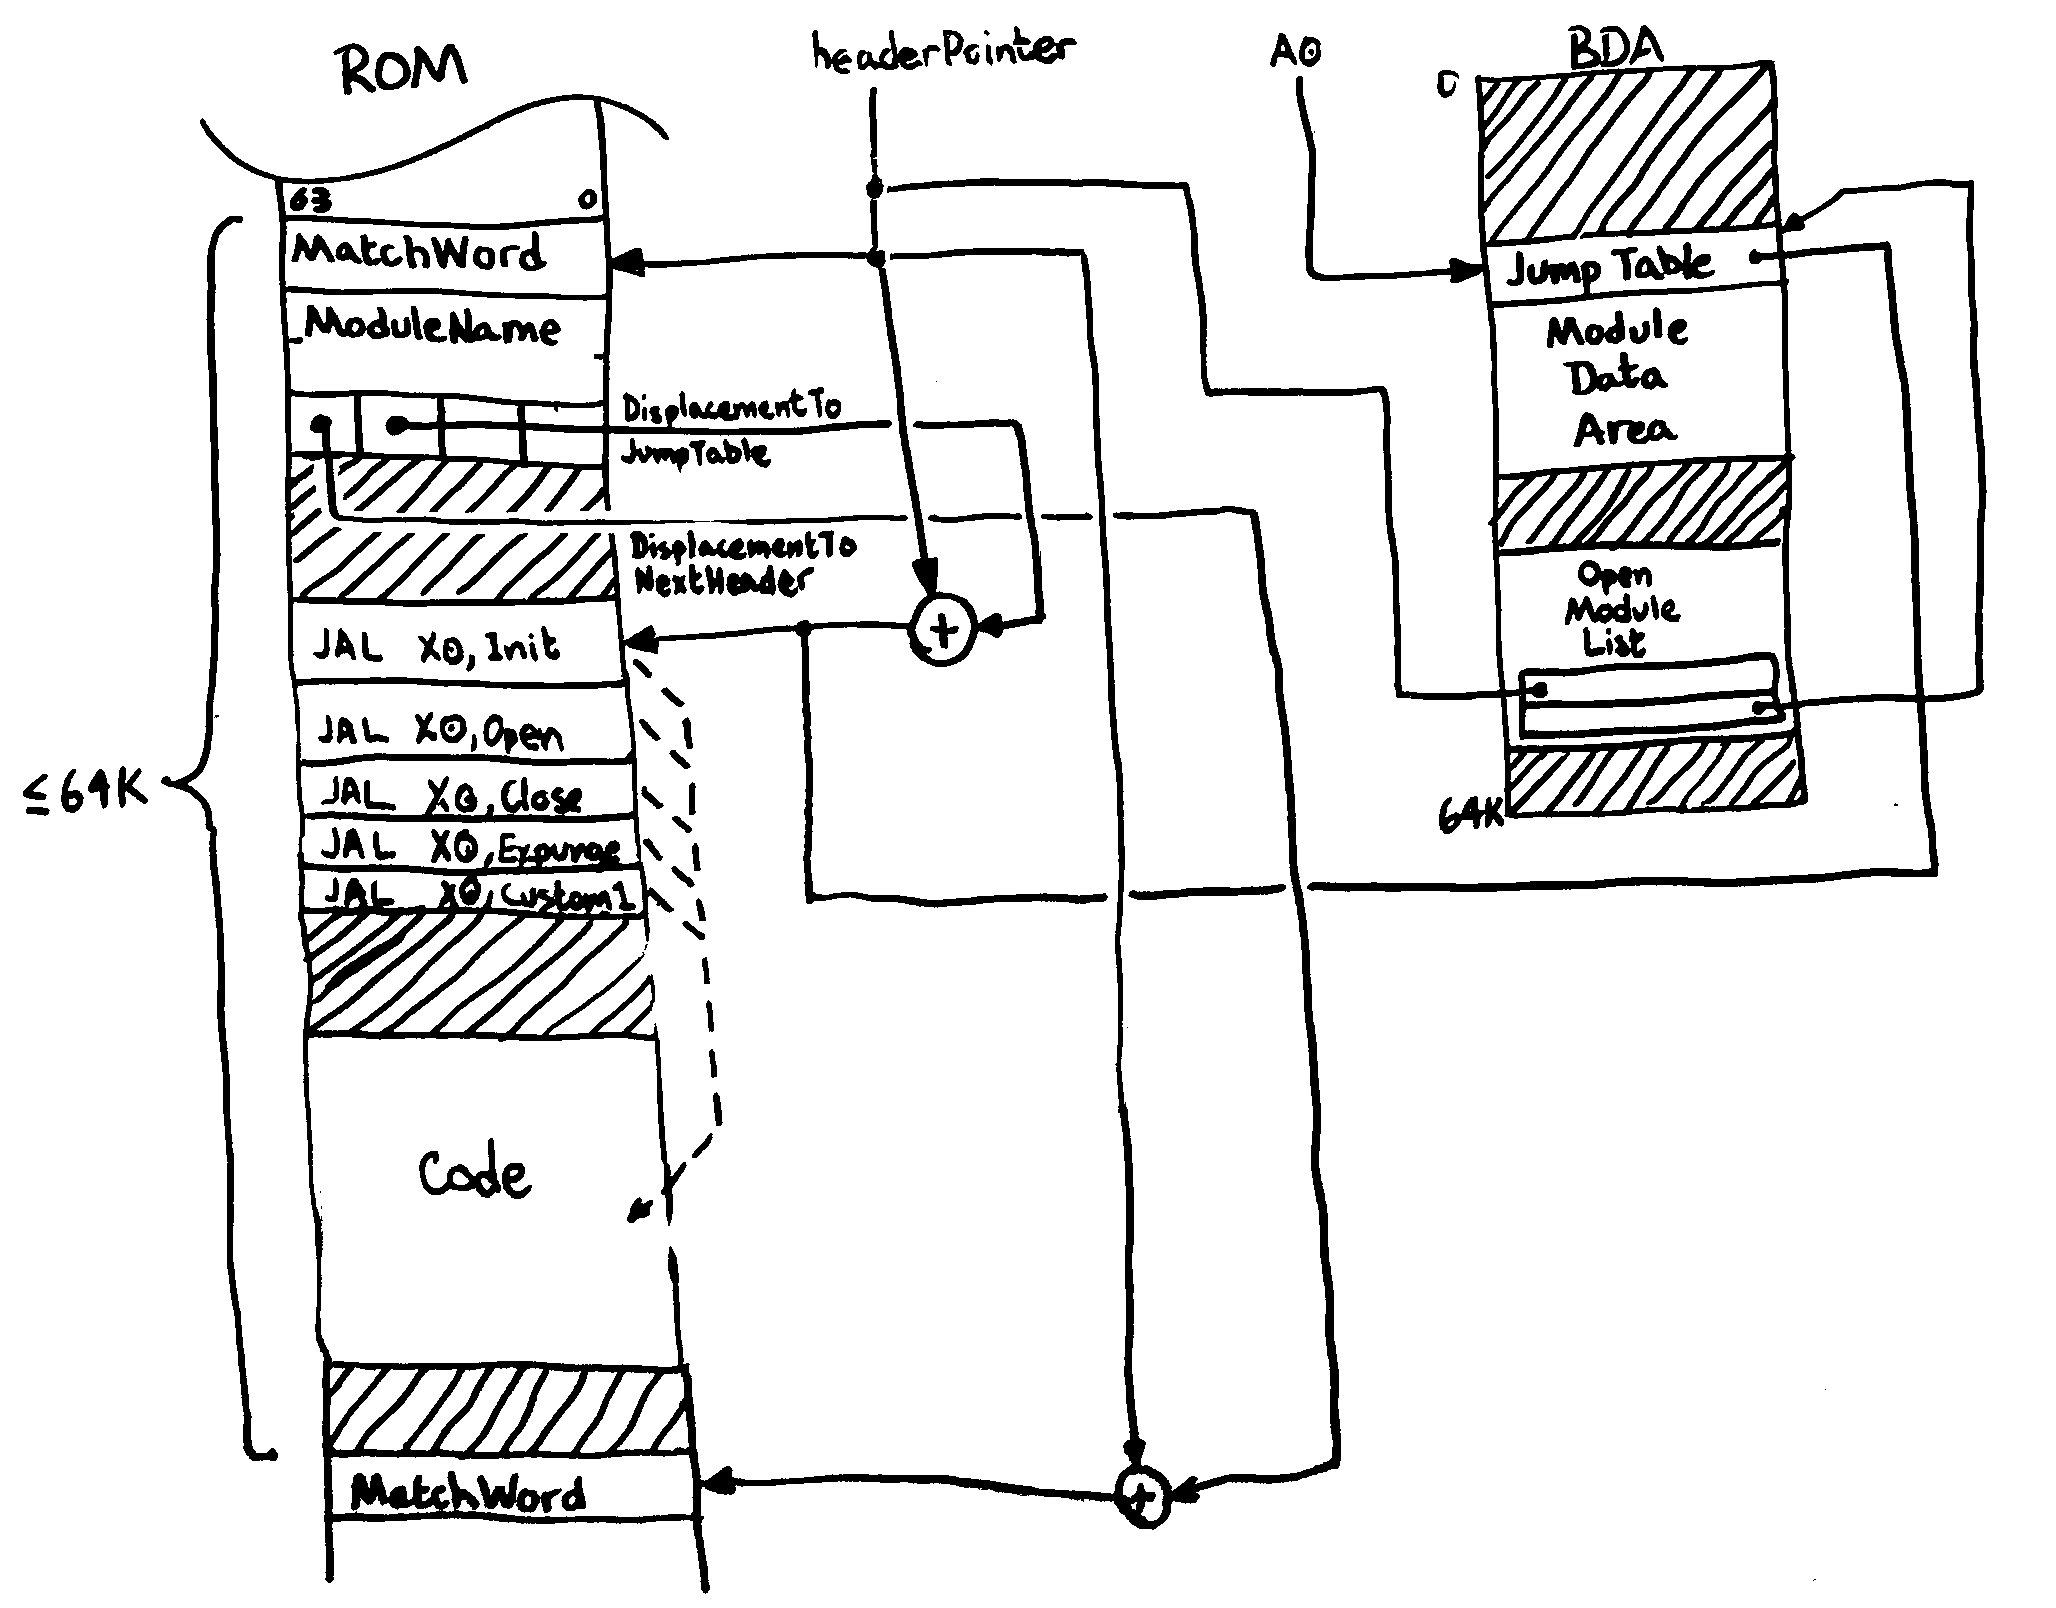 Figure showing relationships between modules, headers, jump tables, BDA, and MDAs.